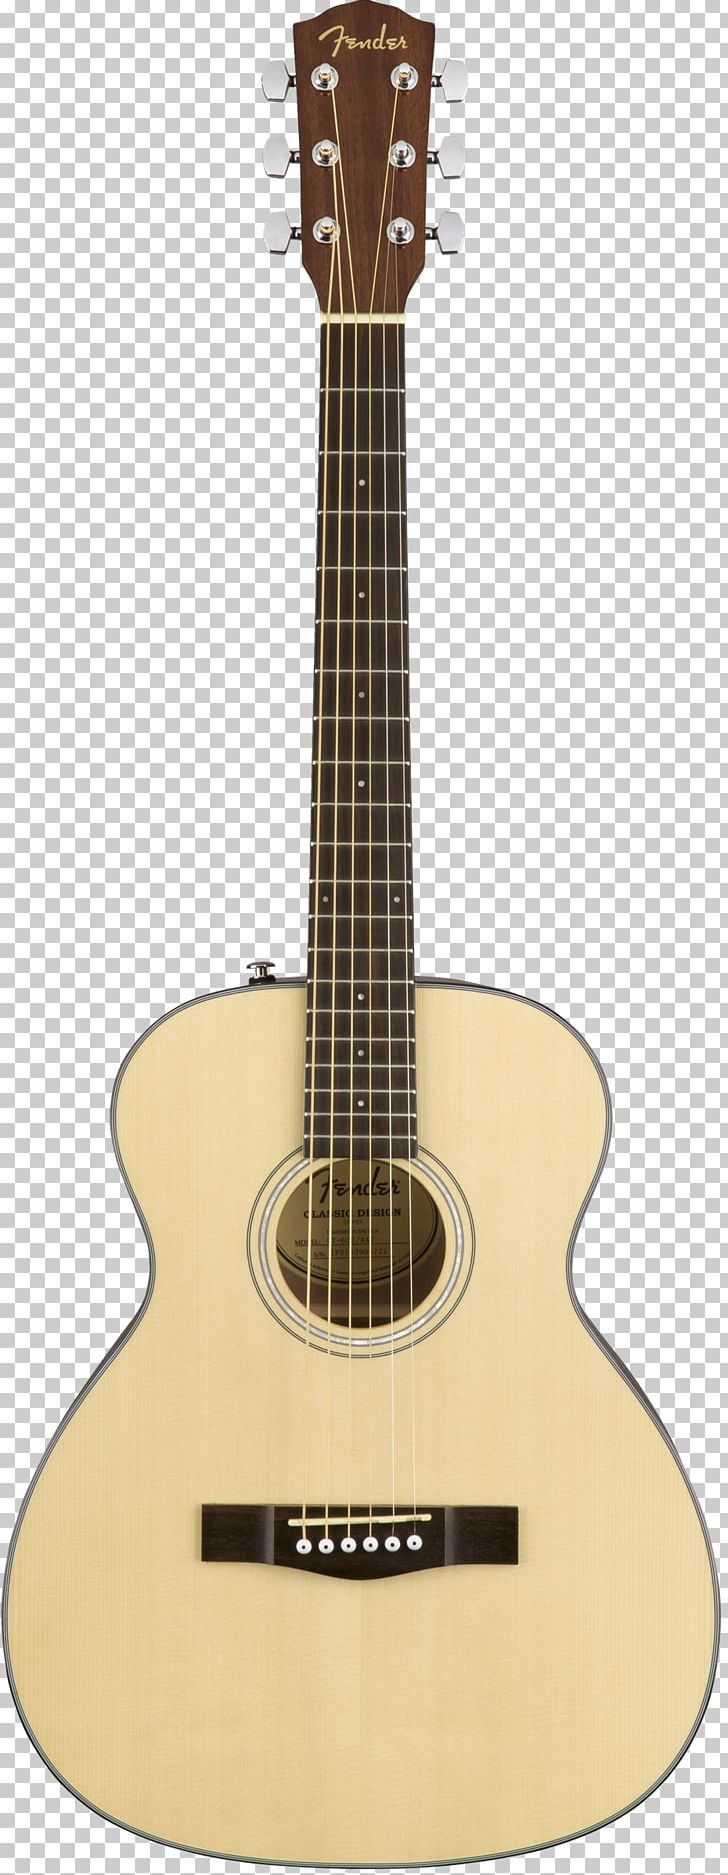 Fender Stratocaster Fender CD-60 Acoustic Guitar Dreadnought Fender CC-60SCE PNG, Clipart, Cuatro, Guitar Accessory, Musical Instrument, Musical Instruments, Nat Free PNG Download